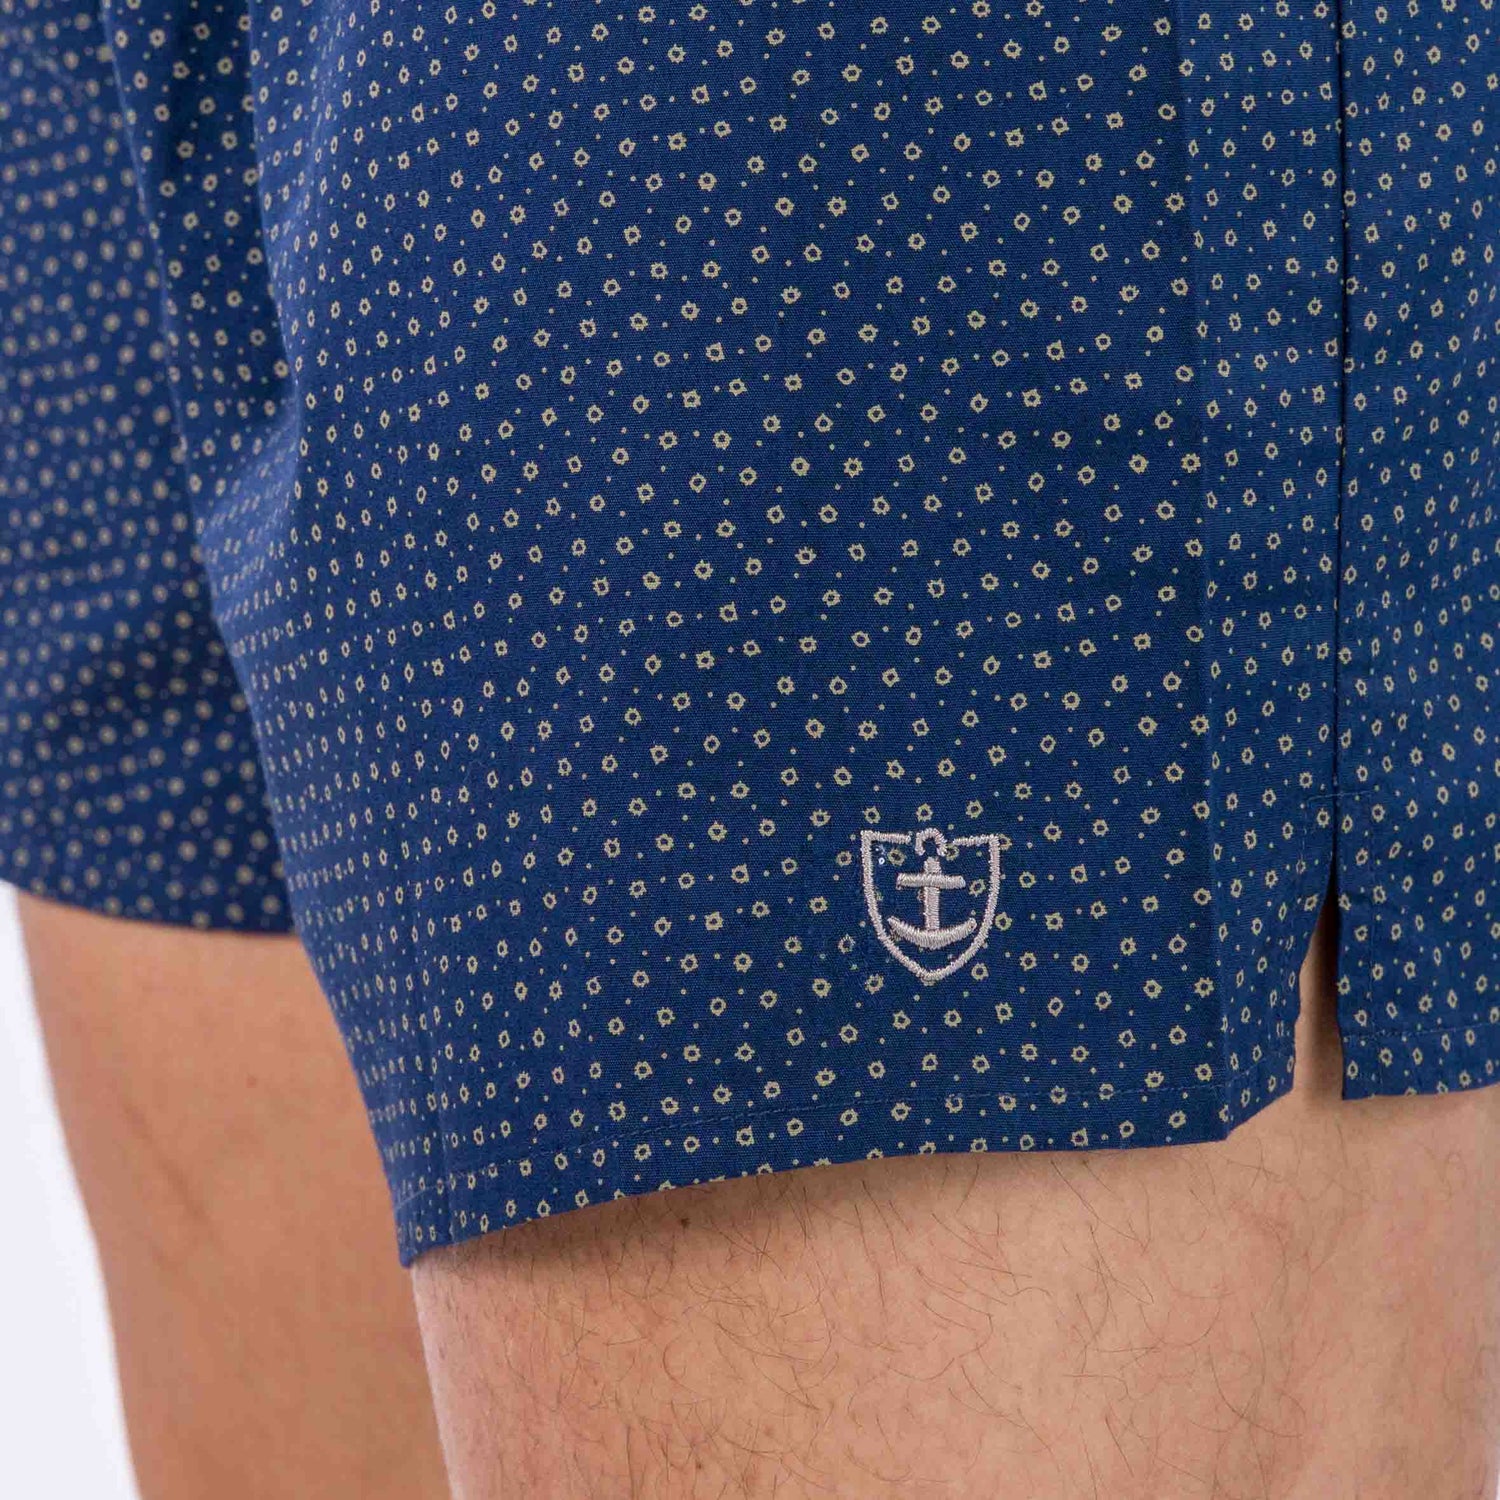 Pack of 2 Blue Pure Cotton Poplin Boxer Shorts with Paisley and Navy Patterns